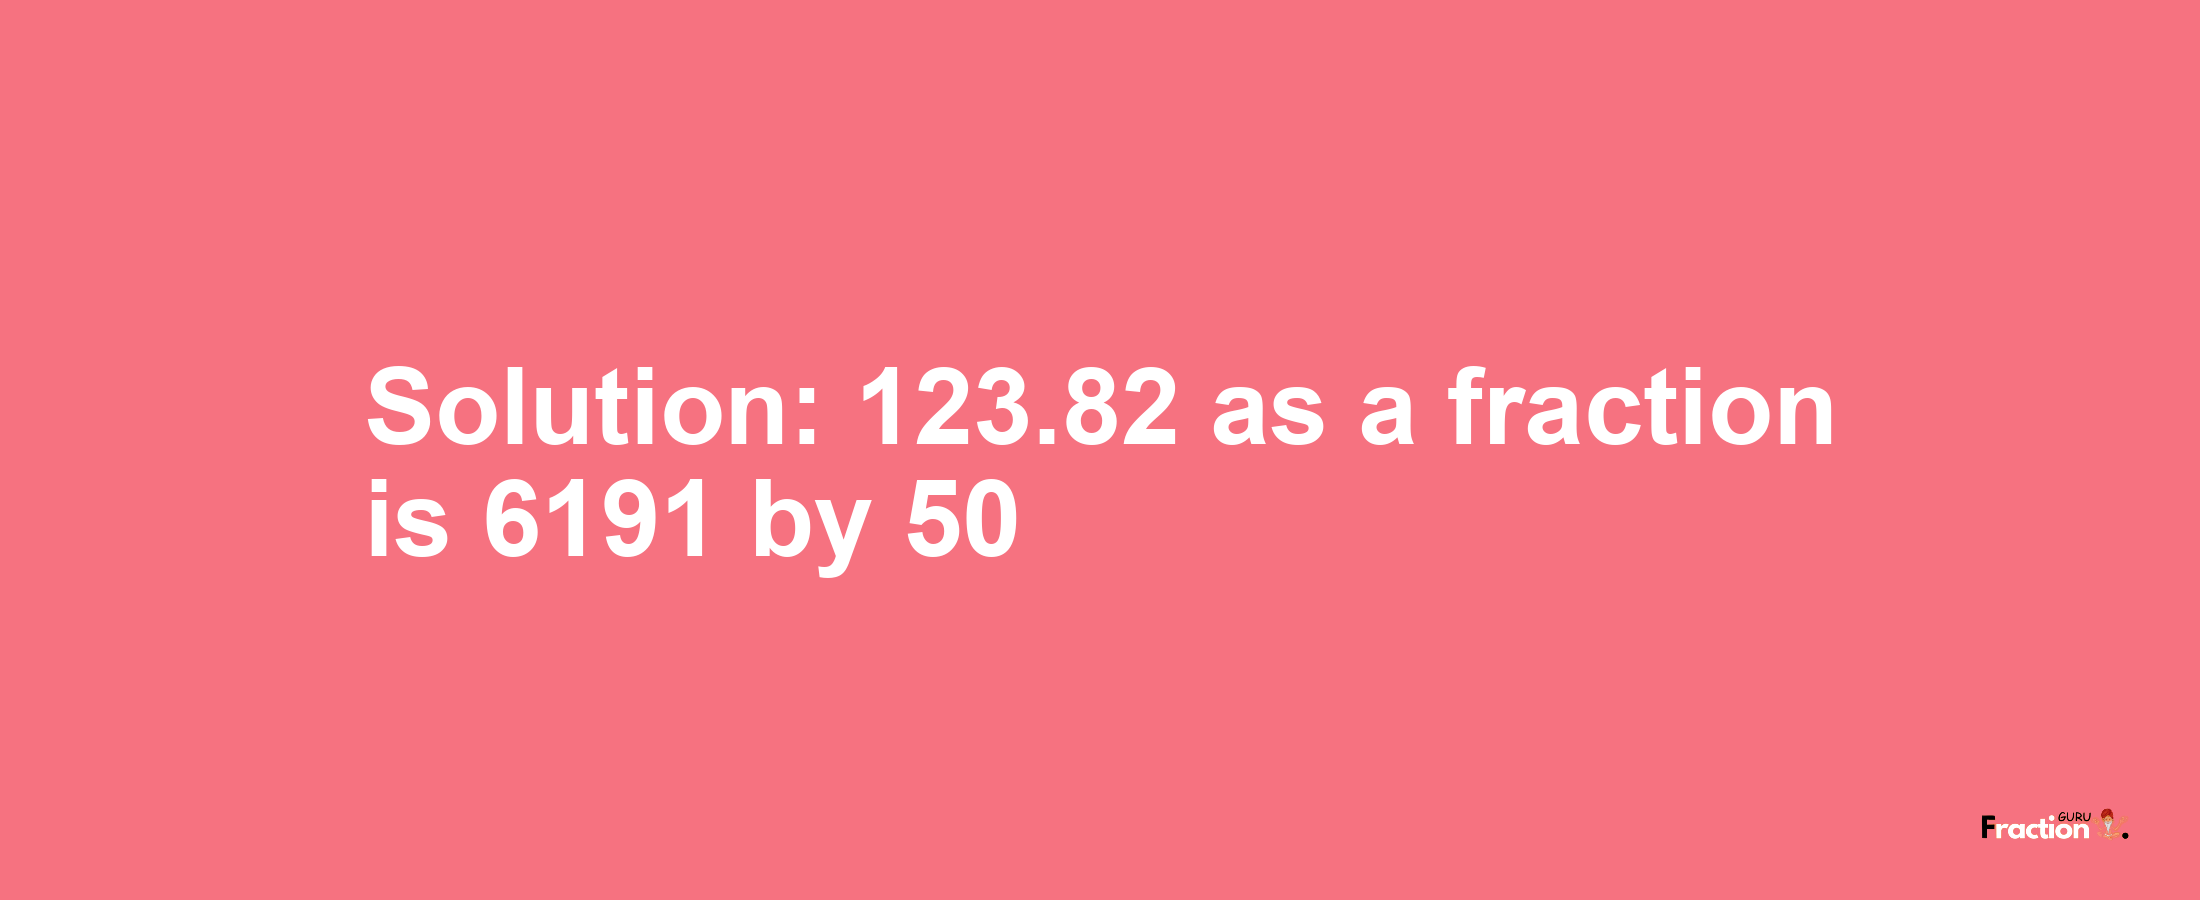 Solution:123.82 as a fraction is 6191/50